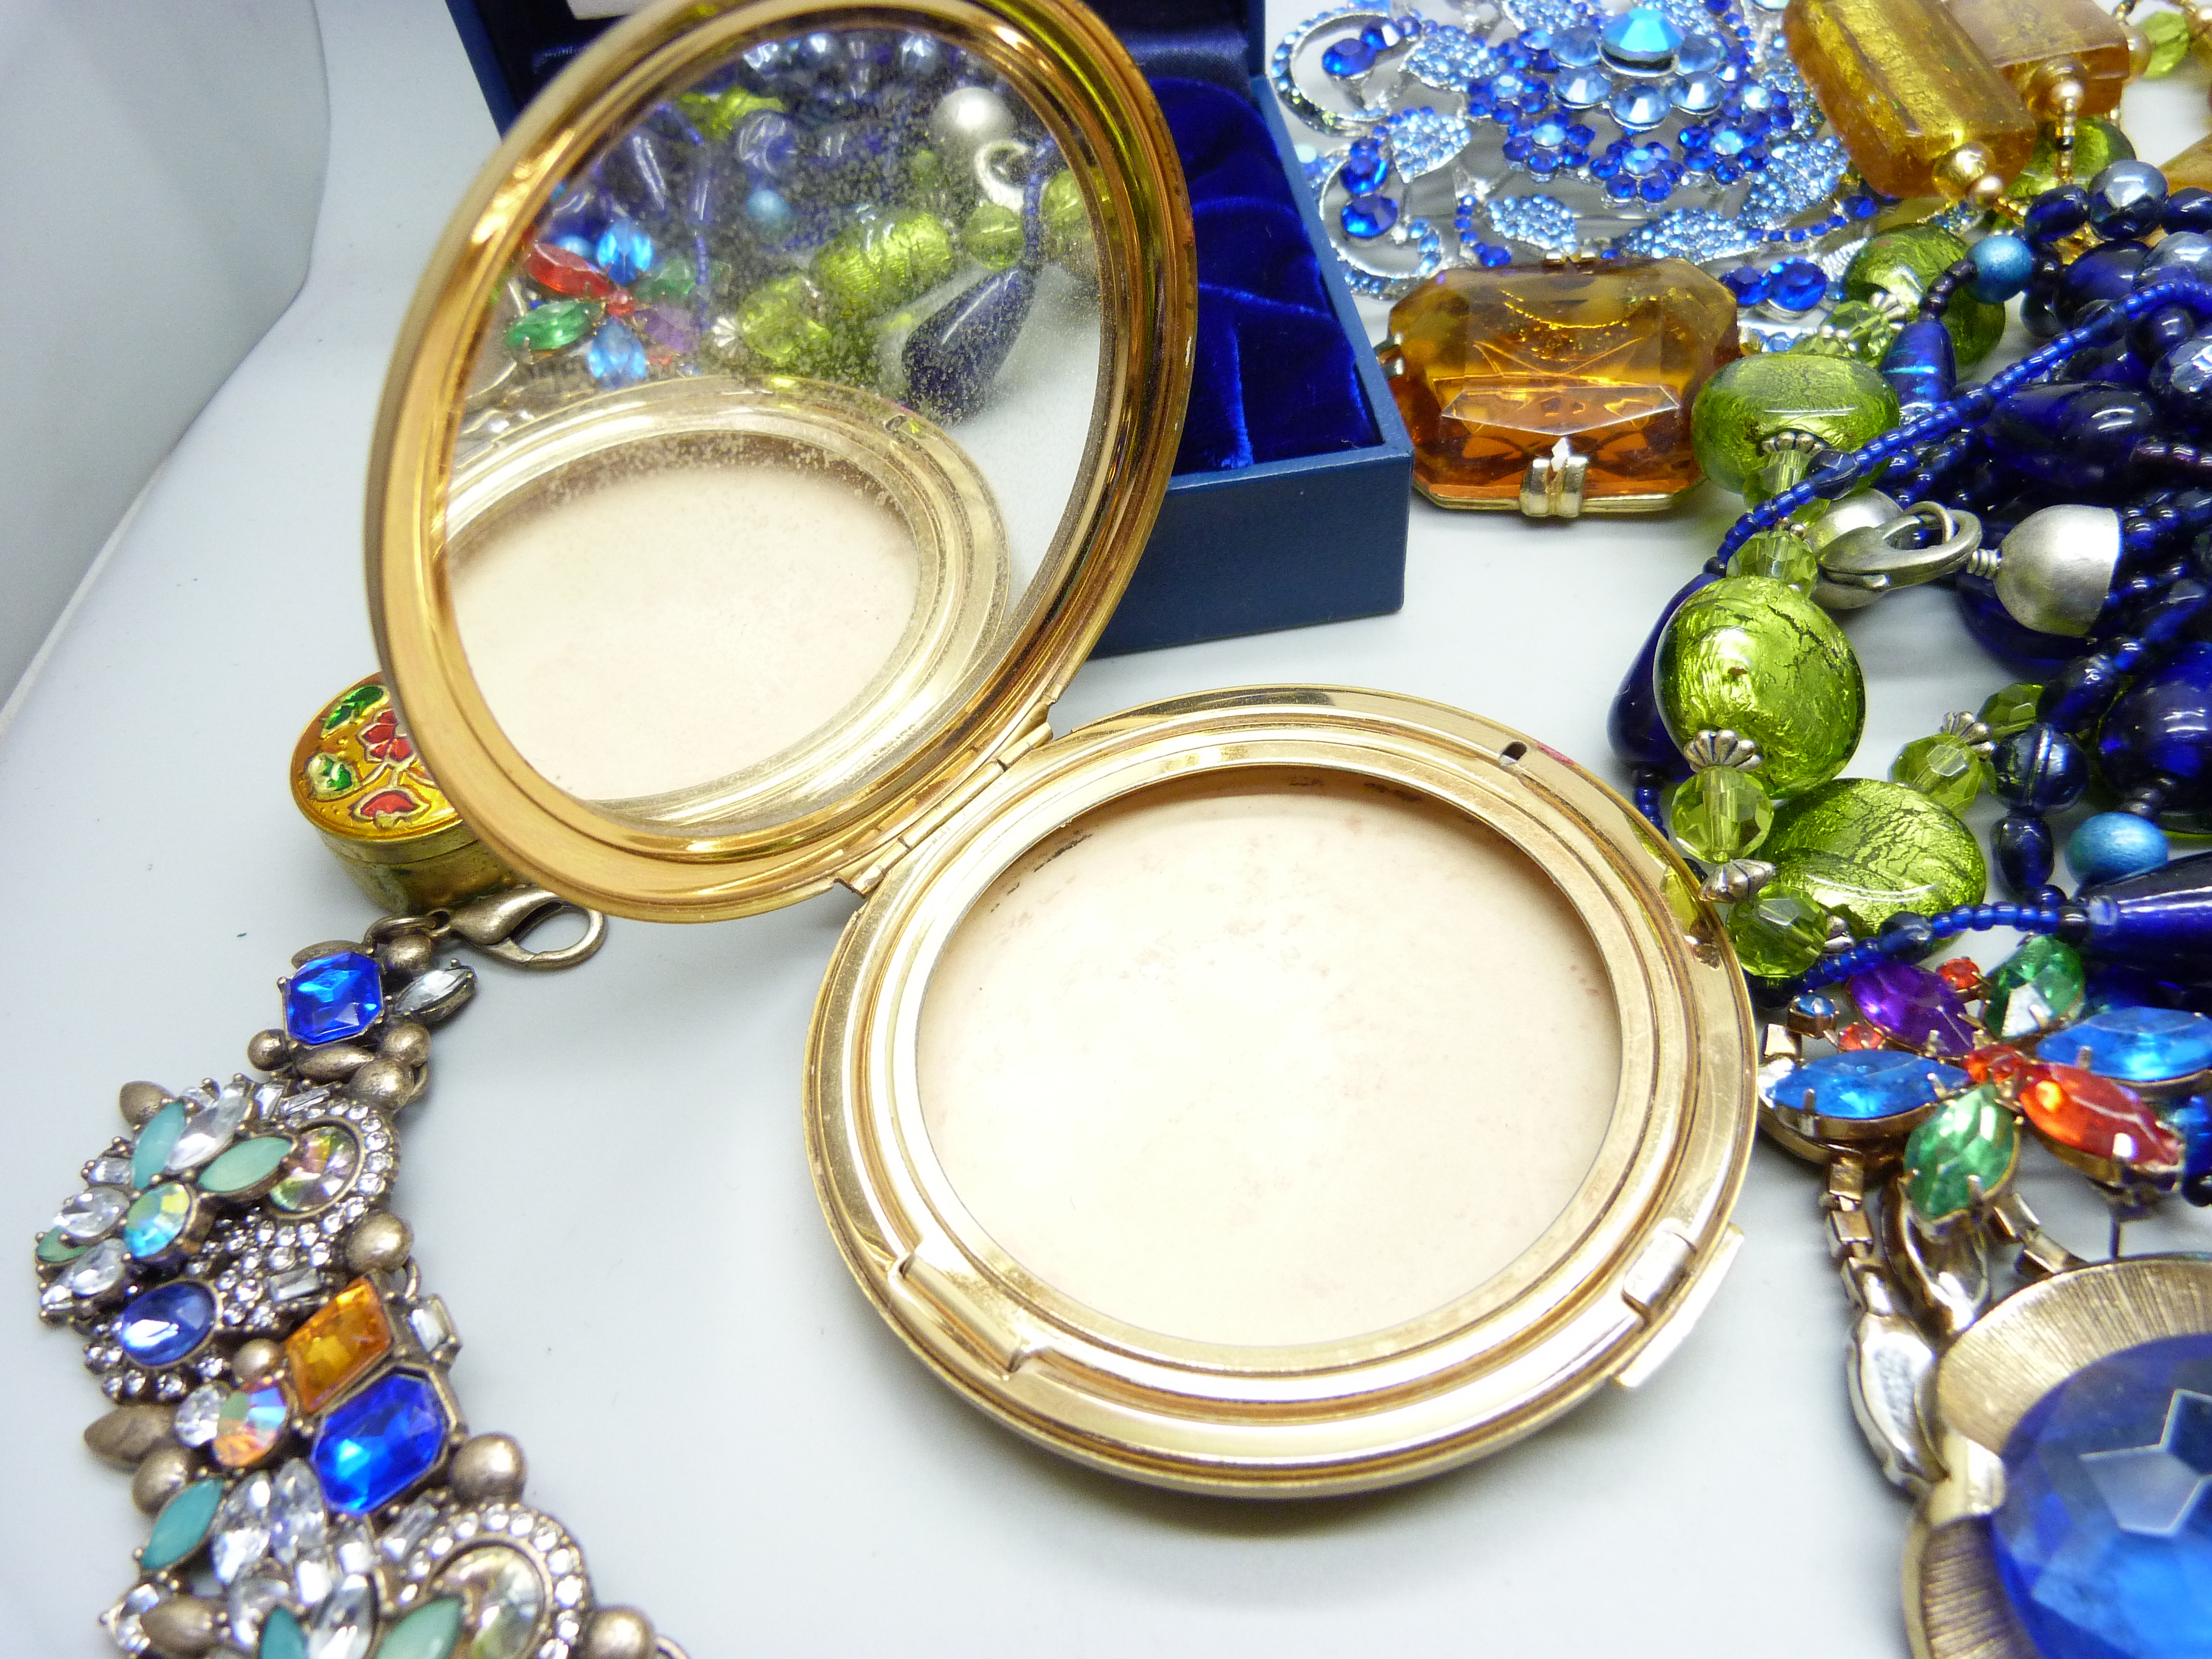 A Halcyon Days enamelled trinket box, a Stratton compact and a collection of brooches, bracelets and - Bild 3 aus 6